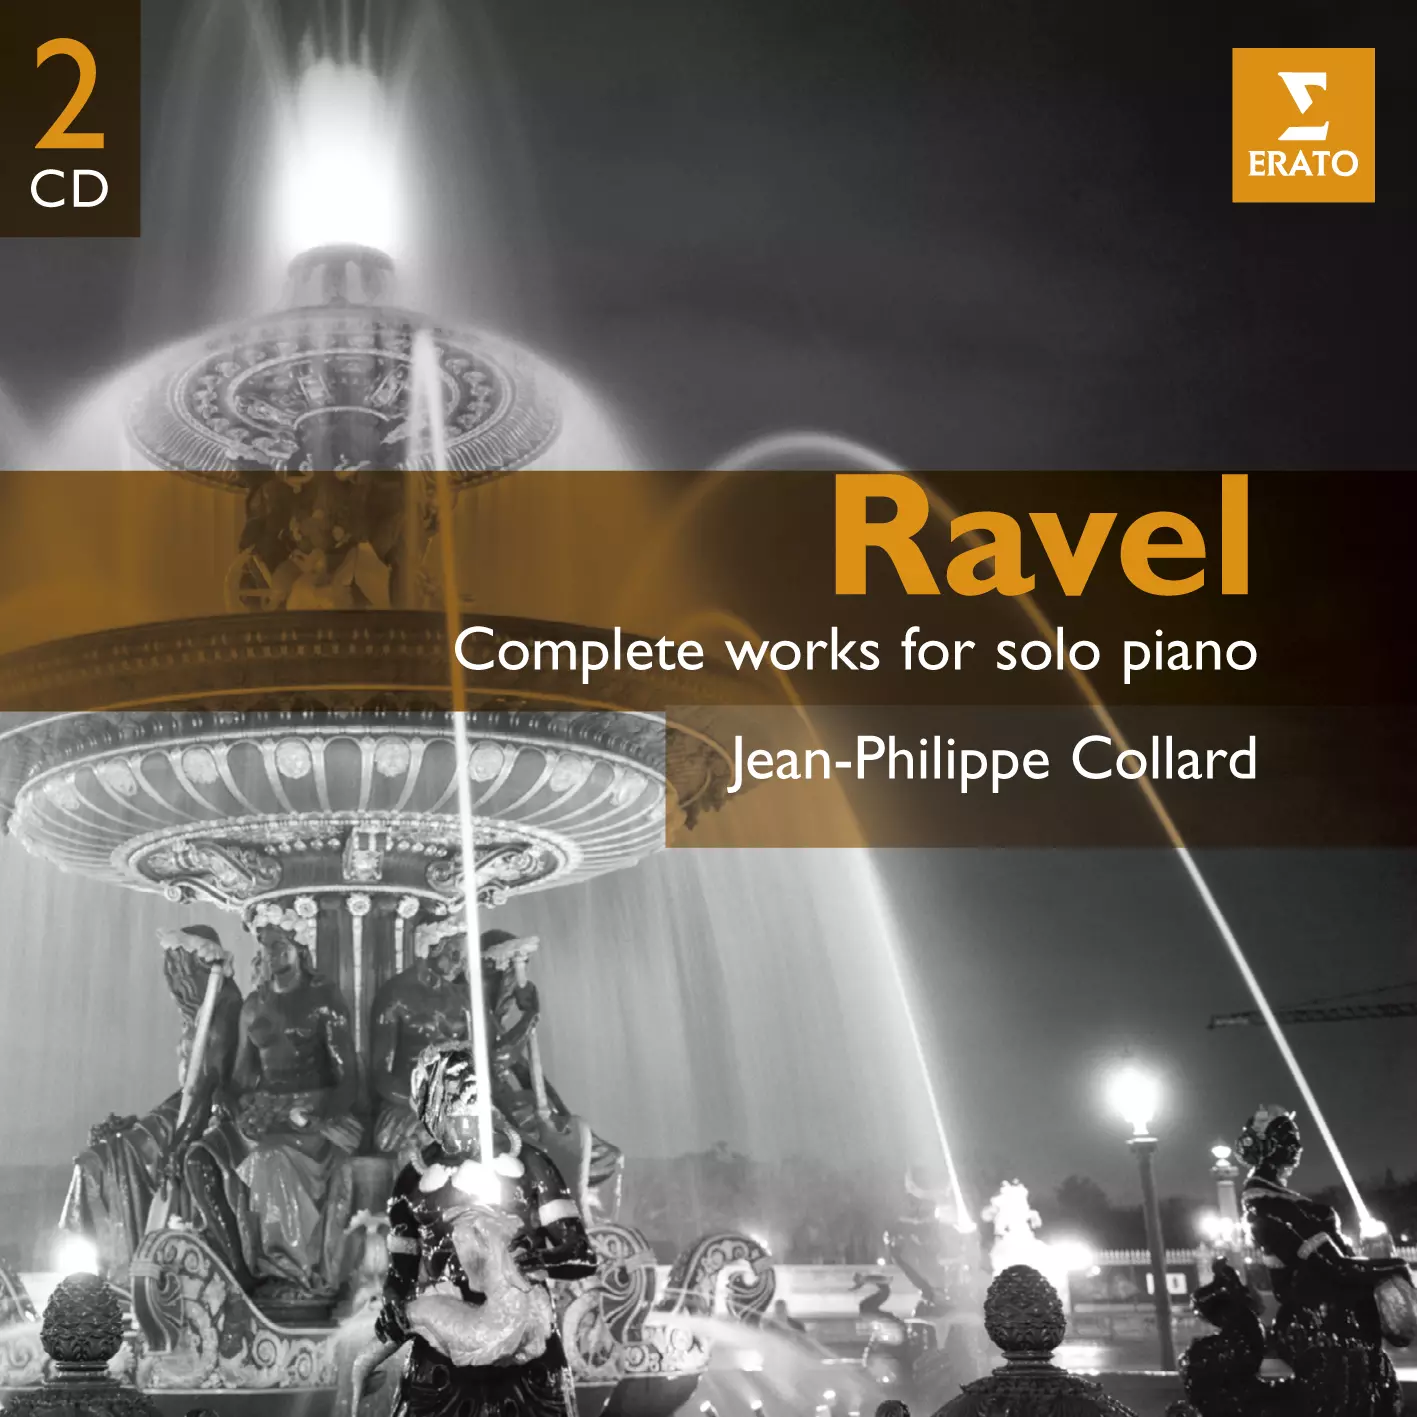 Ravel: Complete works for solo piano